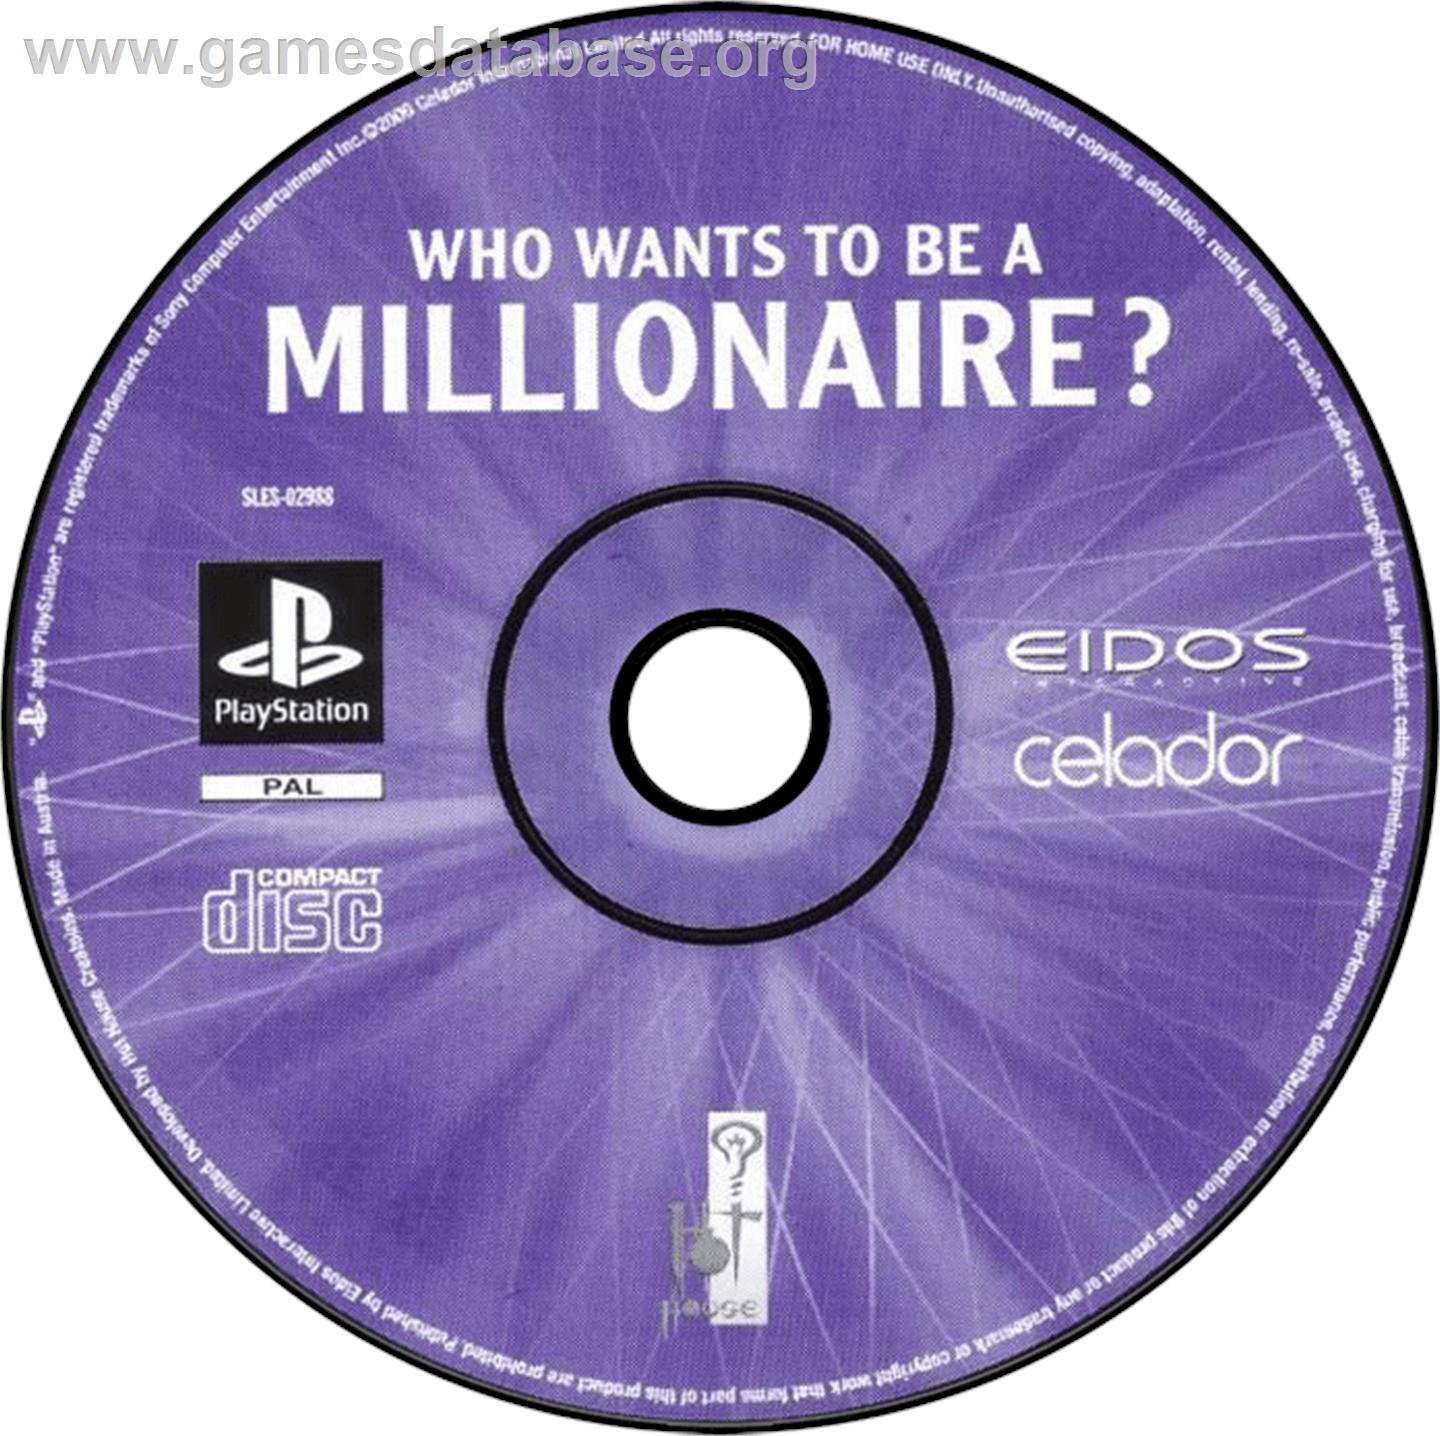 Who Wants to Be a Millionaire (European Edition) - Sony Playstation - Artwork - Disc